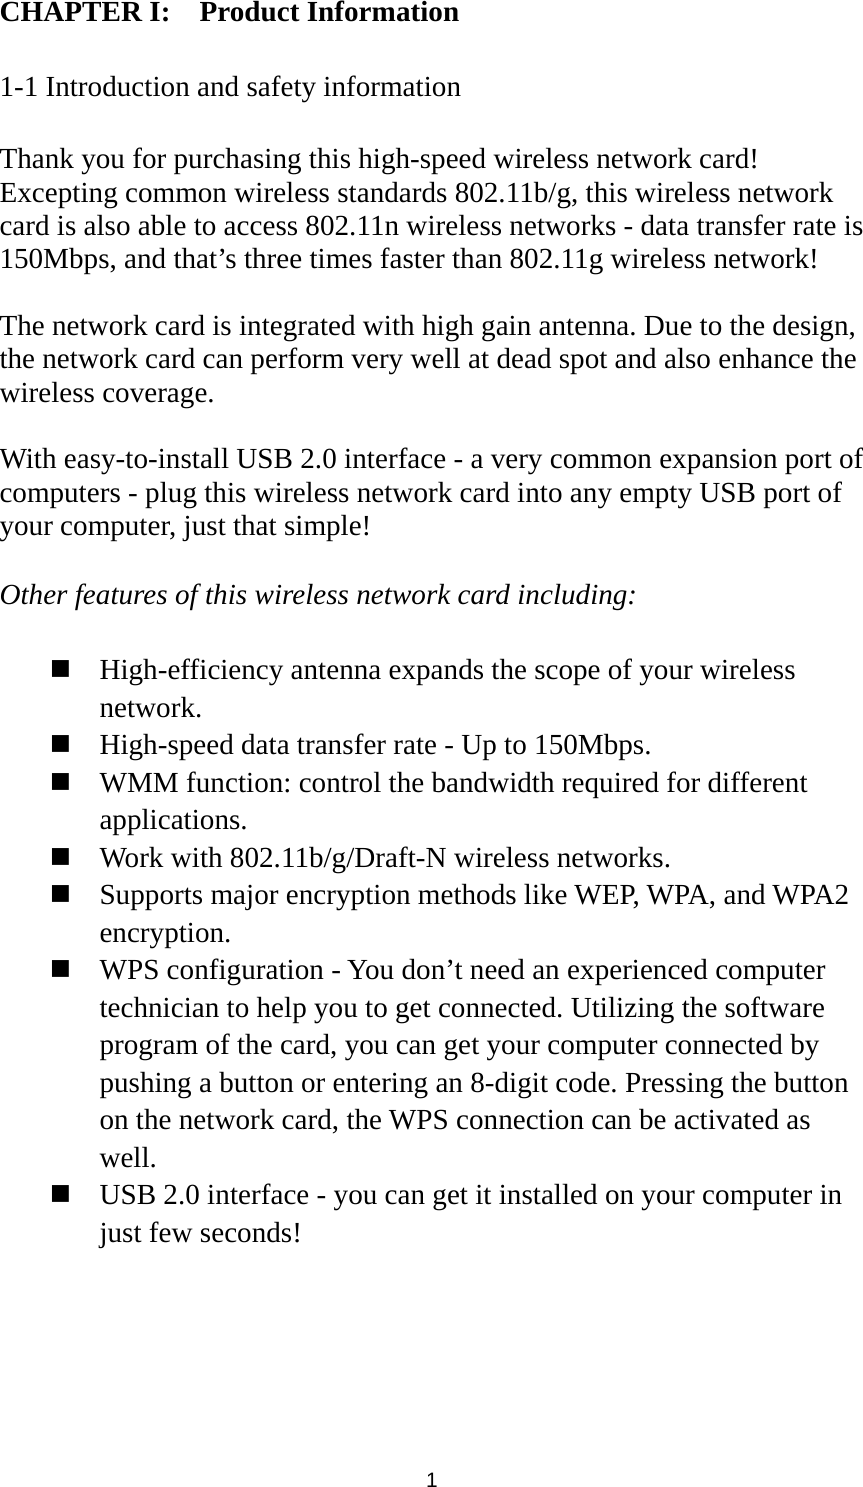  1 CHAPTER I:    Product Information  1-1 Introduction and safety information  Thank you for purchasing this high-speed wireless network card! Excepting common wireless standards 802.11b/g, this wireless network card is also able to access 802.11n wireless networks - data transfer rate is 150Mbps, and that’s three times faster than 802.11g wireless network!    The network card is integrated with high gain antenna. Due to the design, the network card can perform very well at dead spot and also enhance the wireless coverage.  With easy-to-install USB 2.0 interface - a very common expansion port of computers - plug this wireless network card into any empty USB port of your computer, just that simple!  Other features of this wireless network card including:   High-efficiency antenna expands the scope of your wireless network.  High-speed data transfer rate - Up to 150Mbps.  WMM function: control the bandwidth required for different applications.  Work with 802.11b/g/Draft-N wireless networks.  Supports major encryption methods like WEP, WPA, and WPA2 encryption.  WPS configuration - You don’t need an experienced computer technician to help you to get connected. Utilizing the software program of the card, you can get your computer connected by pushing a button or entering an 8-digit code. Pressing the button on the network card, the WPS connection can be activated as well.  USB 2.0 interface - you can get it installed on your computer in just few seconds! 